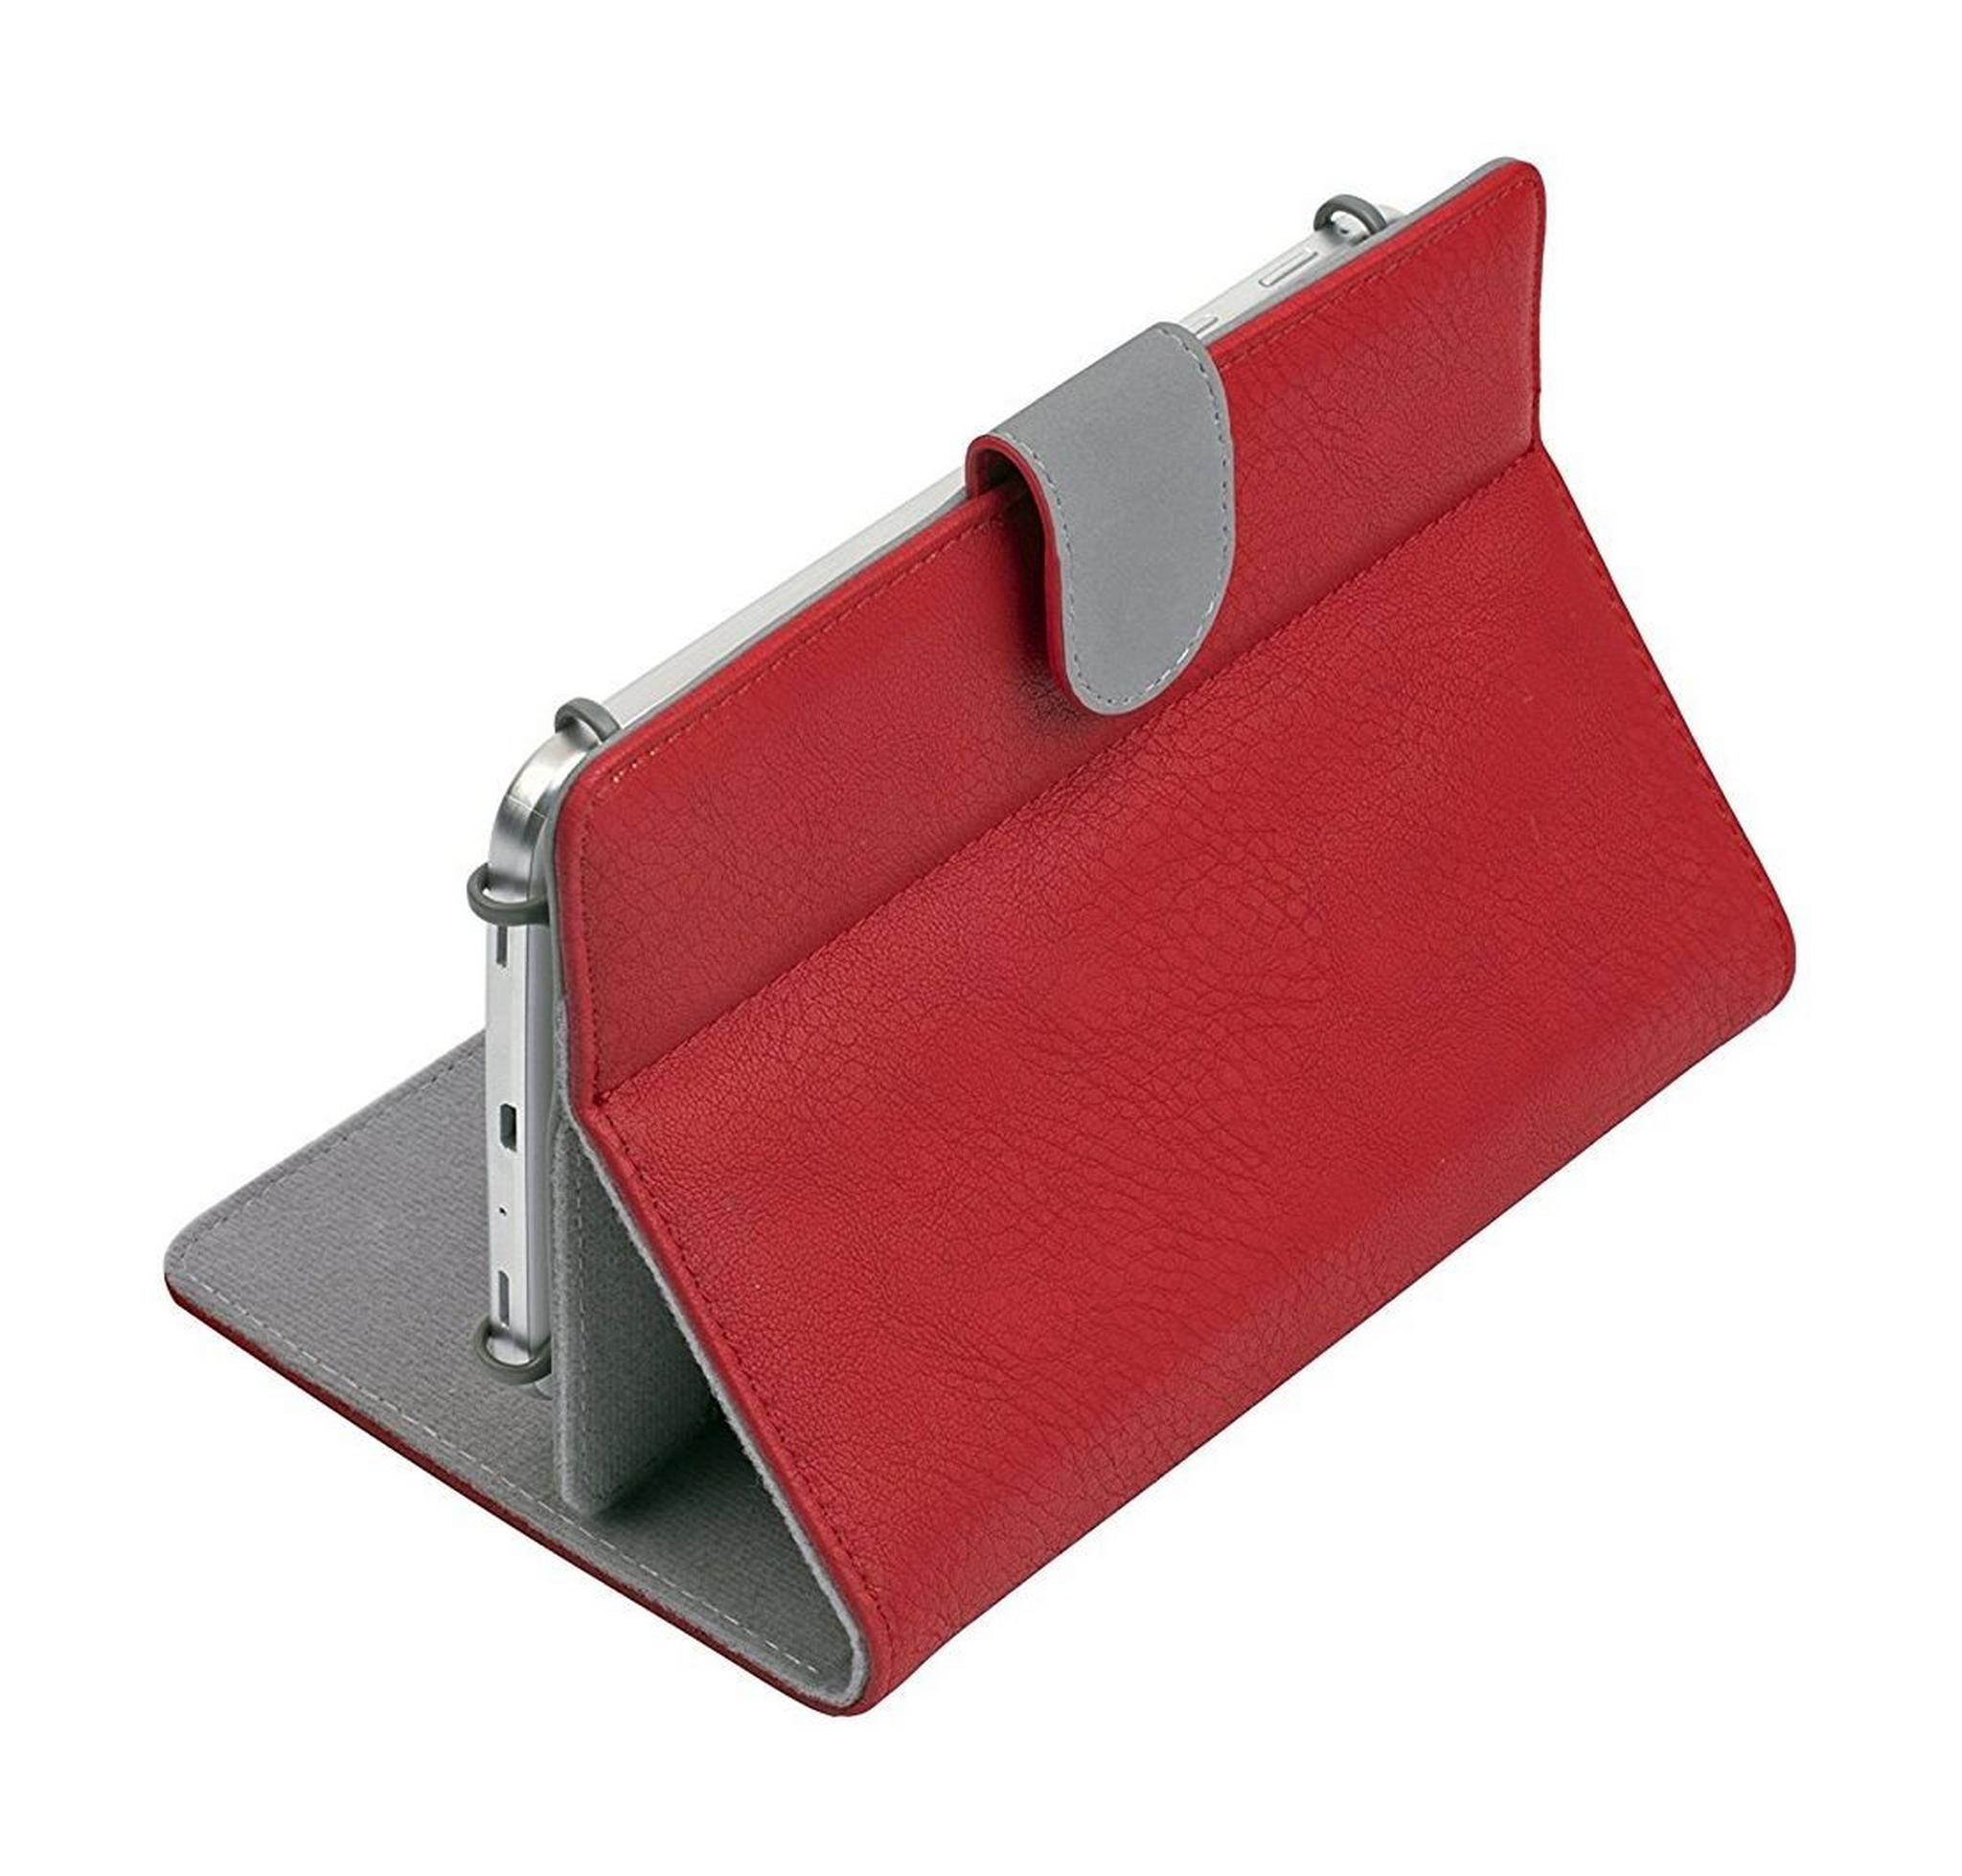 RivaCase Protective Case for 10 inch Tablet, 3017 - Red